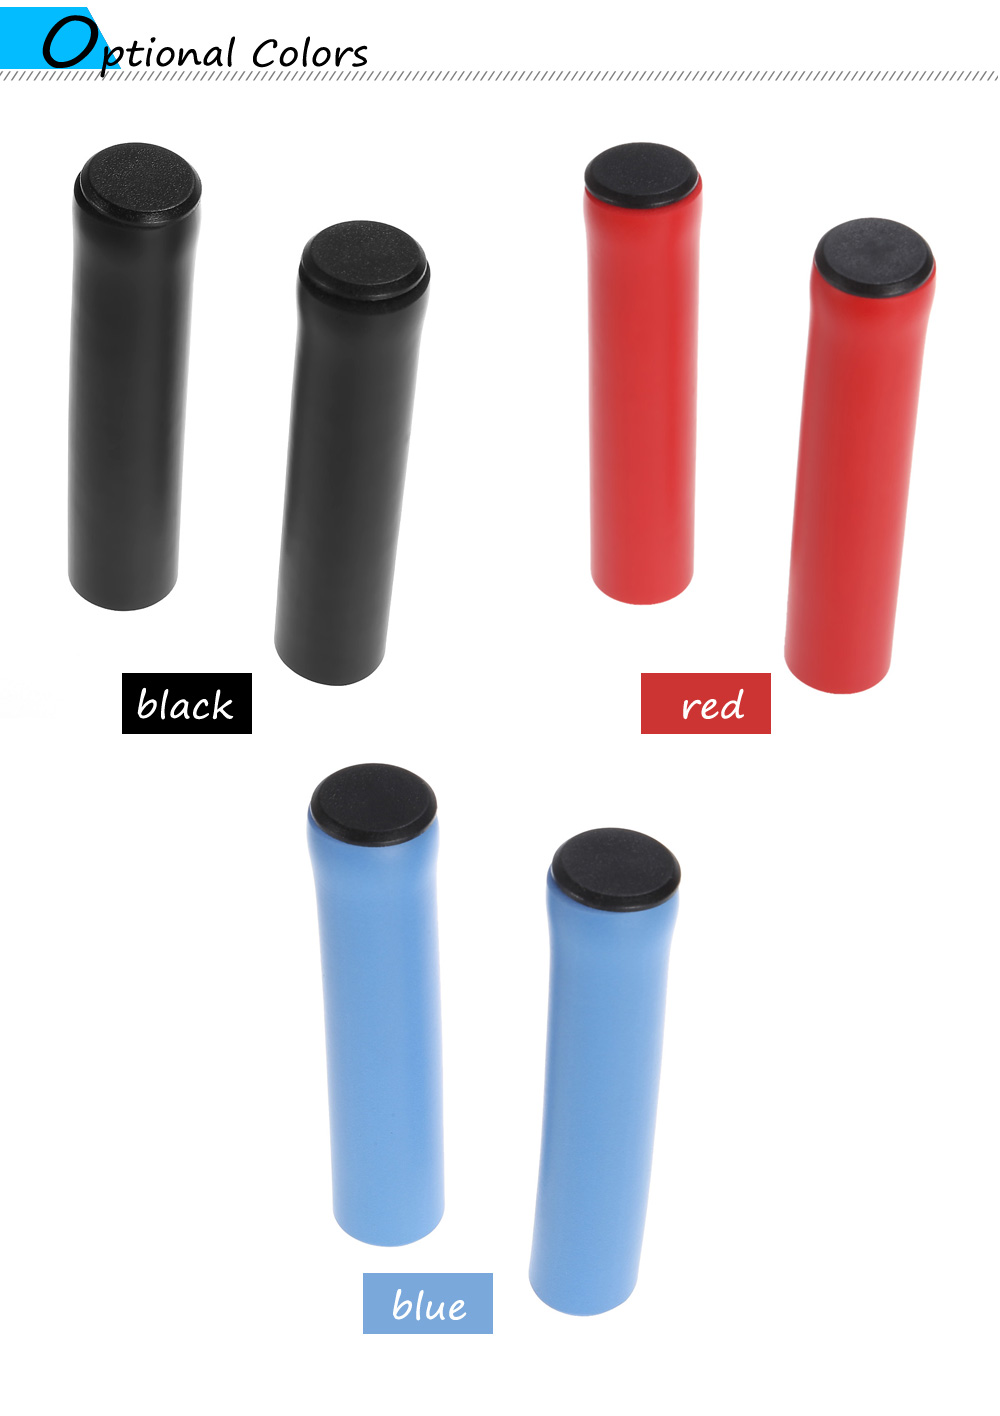 BEATACE BE61 - GP Pair of Universal Boutique Bike Handlebar Grips Cycling Accessories